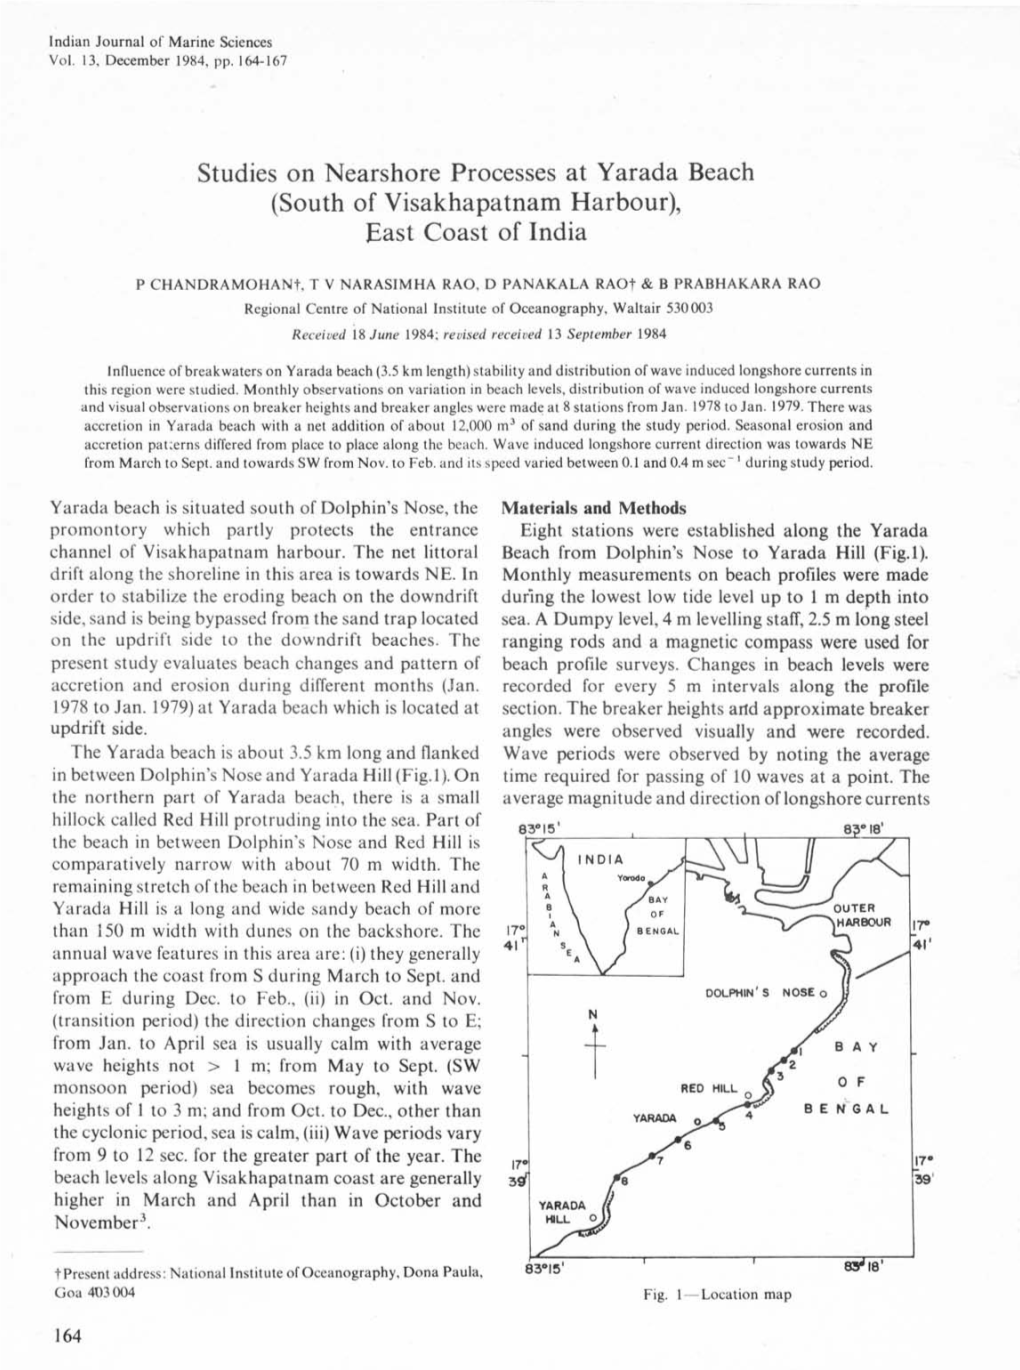 Studies on Nearshore Processes at Yarada Beach (South of Visakhapatnam Harbour), East Coast of India